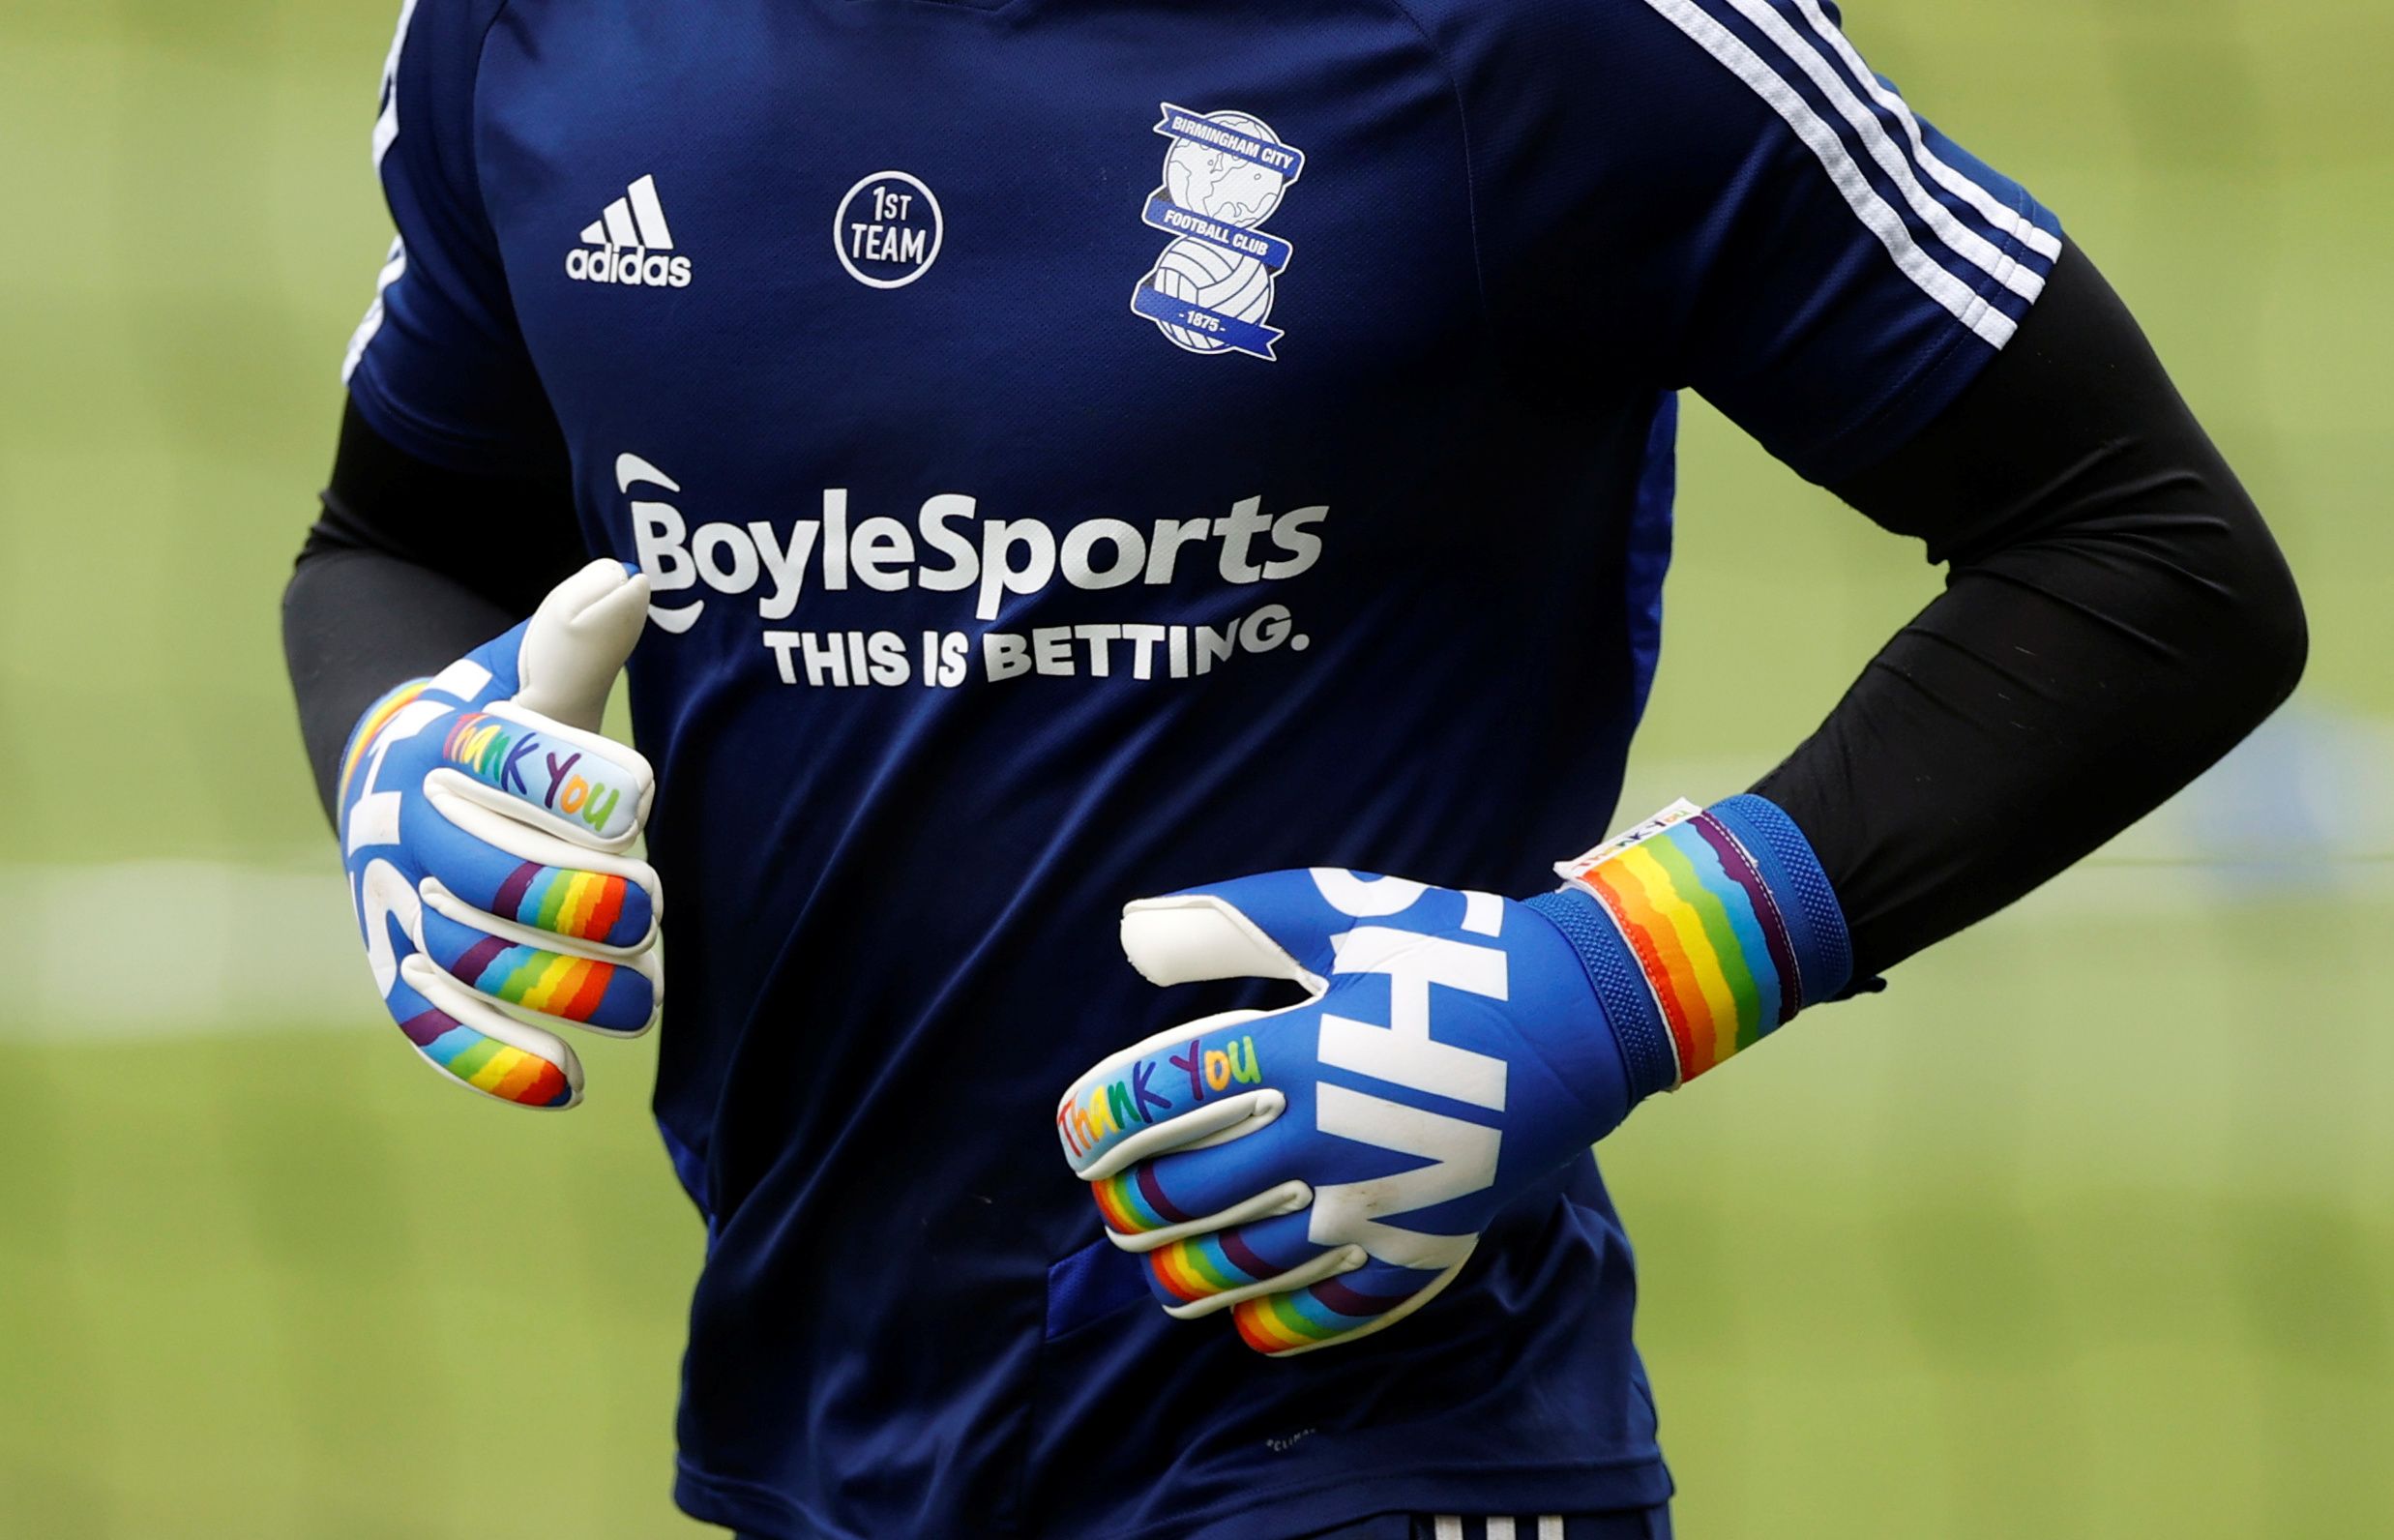 Soccer Football - Championship - Fulham v Birmingham City - Craven Cottage, London, Britain - July 4, 2020  NHS and rainbow tributes are seen on the gloves of Birmingham City's Connal Trueman during warm up, as play resumes behind closed doors following the outbreak of the coronavirus disease (COVID-19)  Action Images/John Sibley  EDITORIAL USE ONLY. No use with unauthorized audio, video, data, fixture lists, club/league logos or 